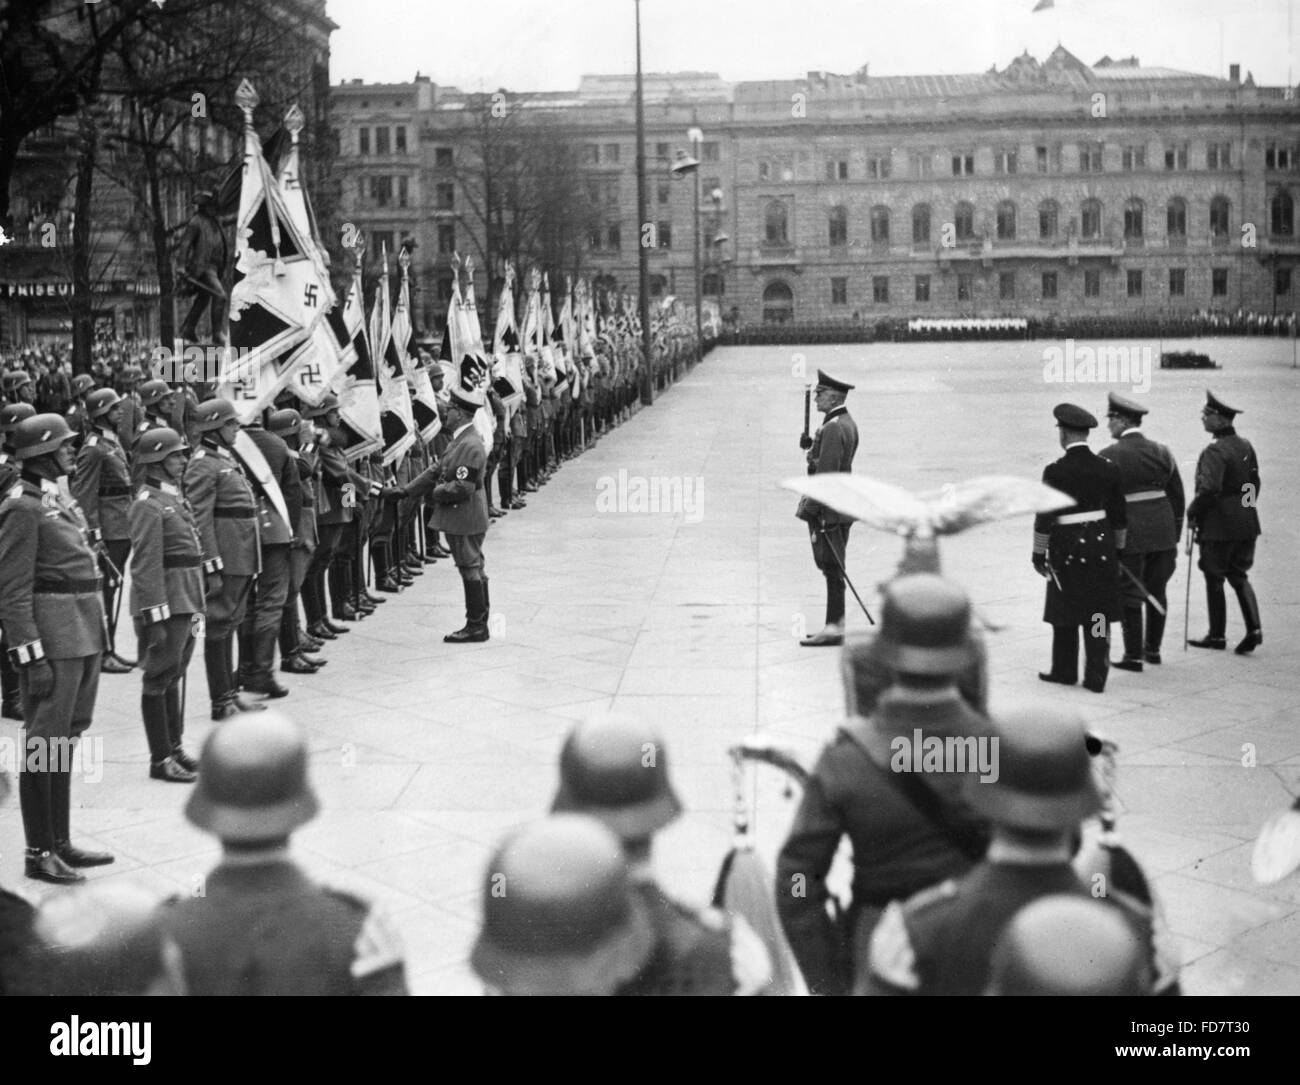 Handover of new flags to the Wehrmacht in Berlin, 1937 Stock Photo